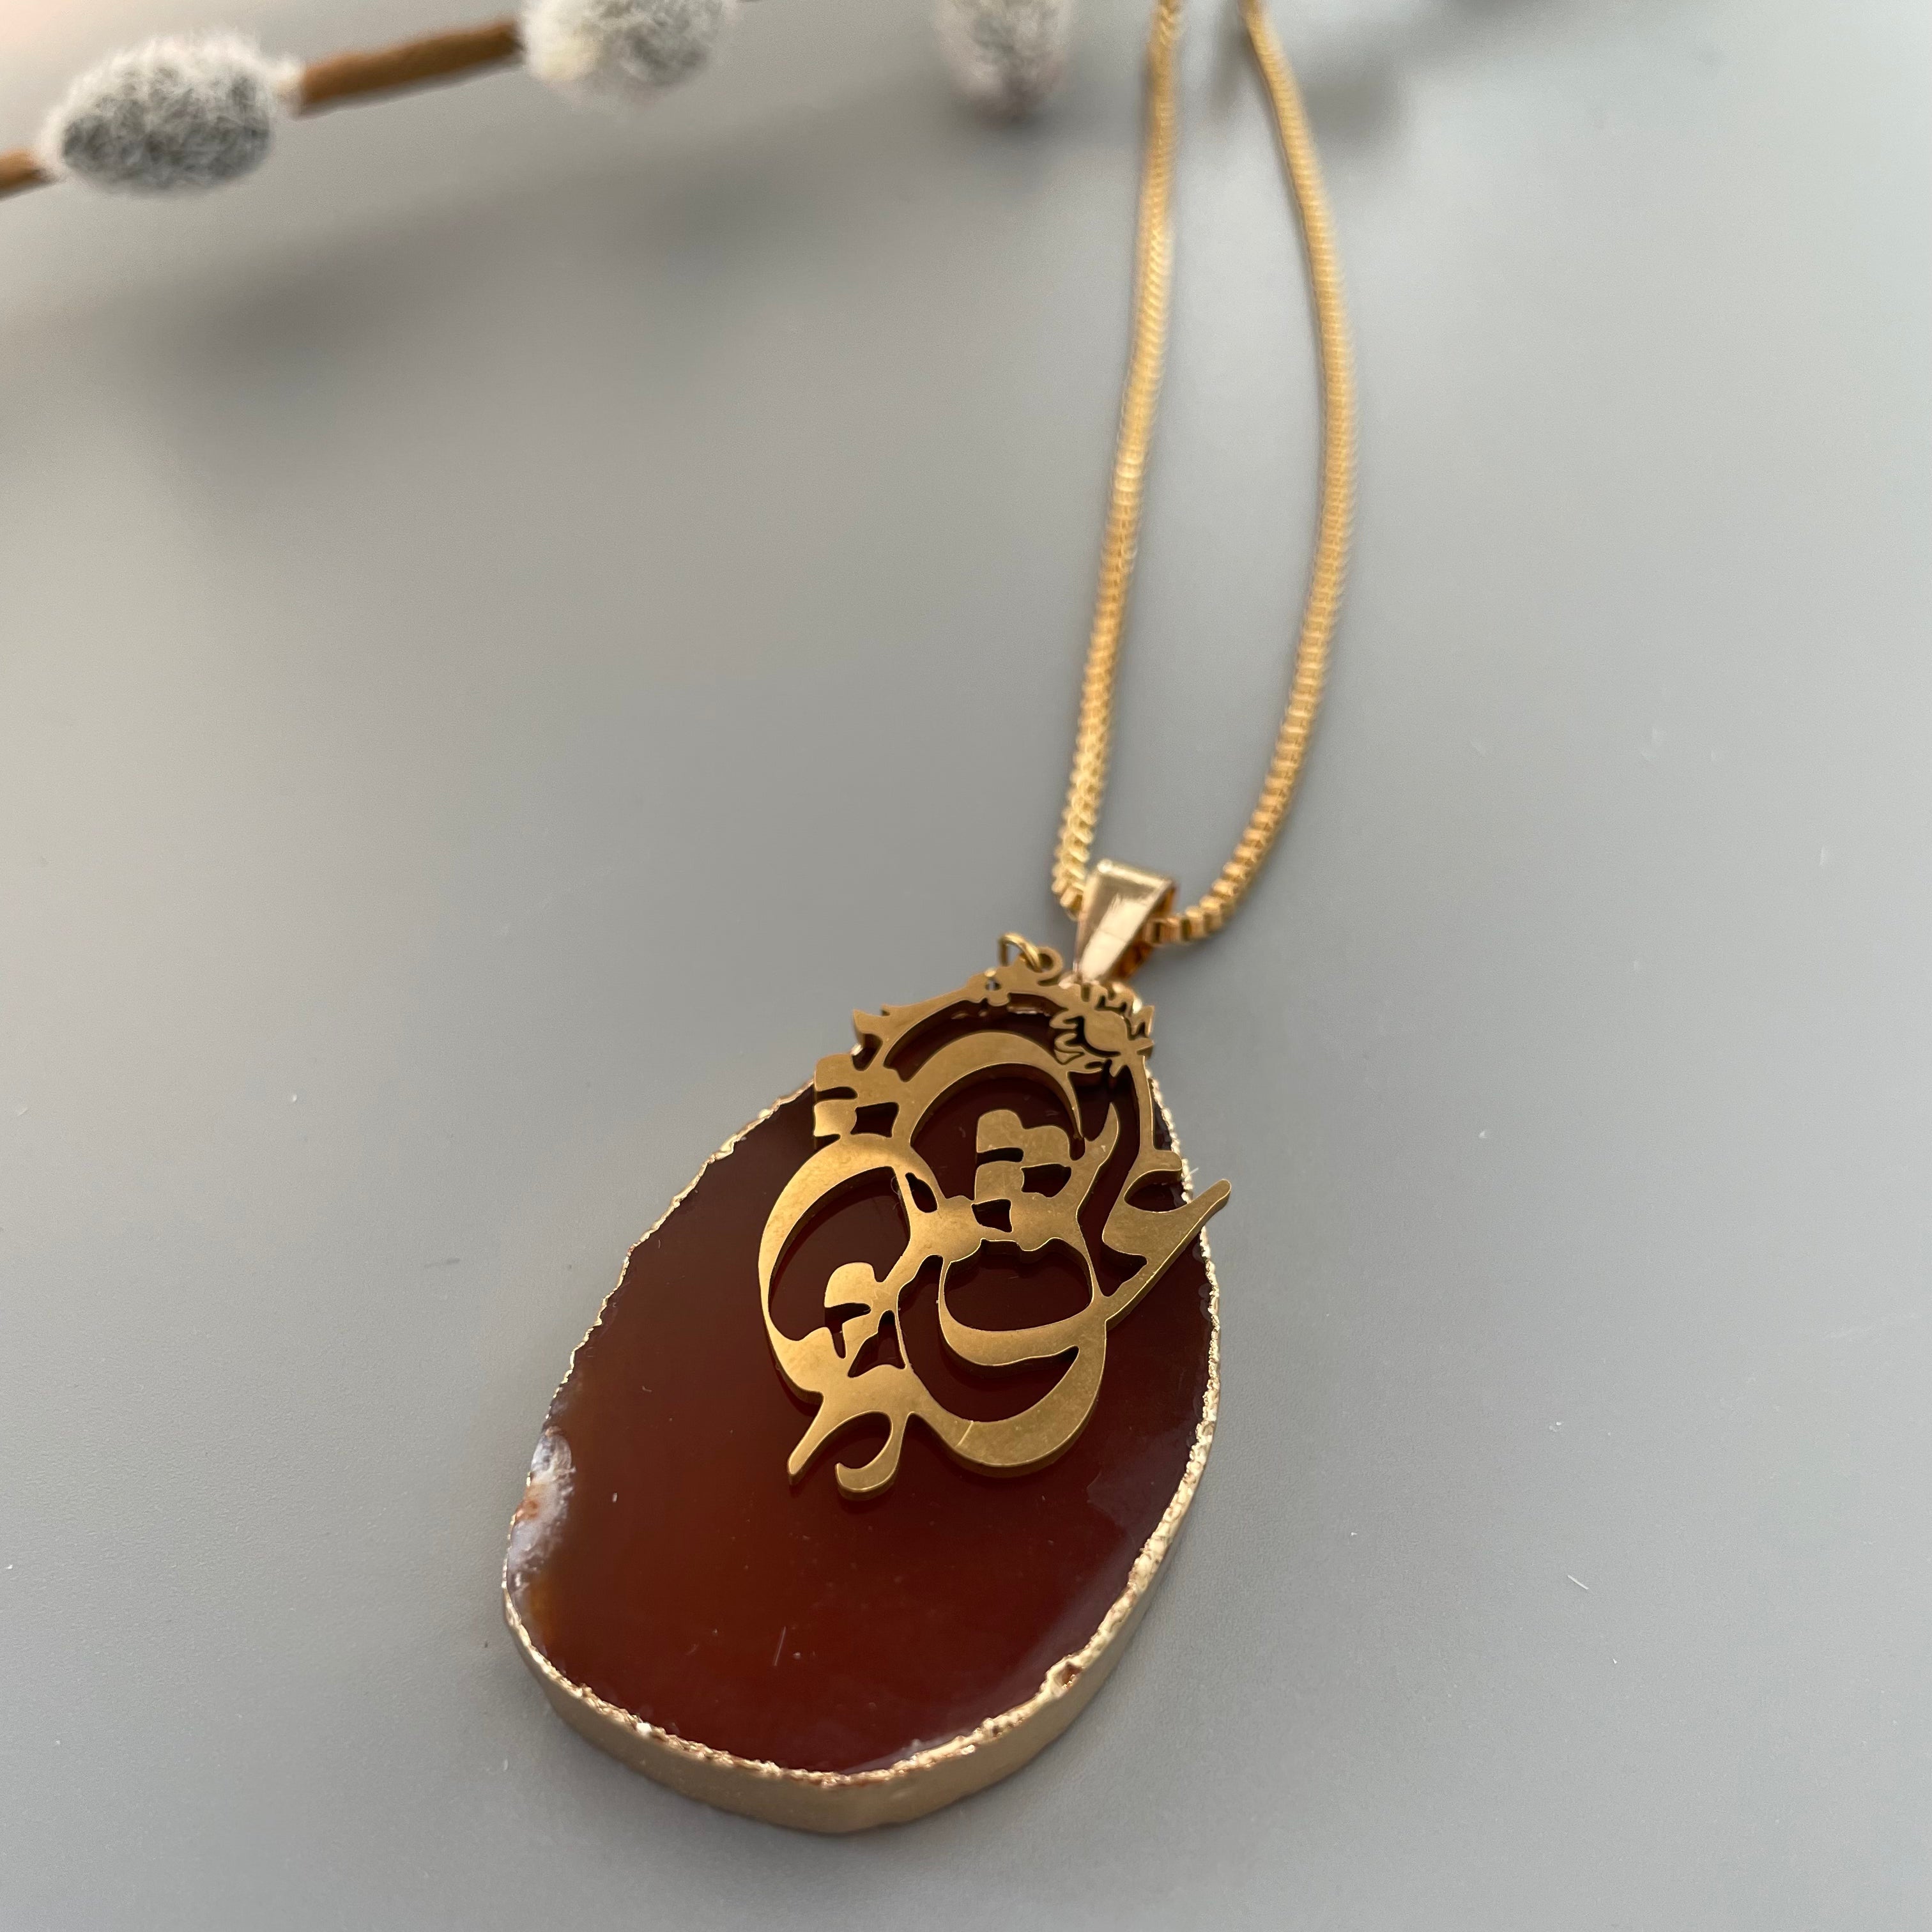 Persian Calligraphy Jewelry-Persian Love Necklace with Druzy Stone: Persian Jewelry-AFRA ART GALLERY